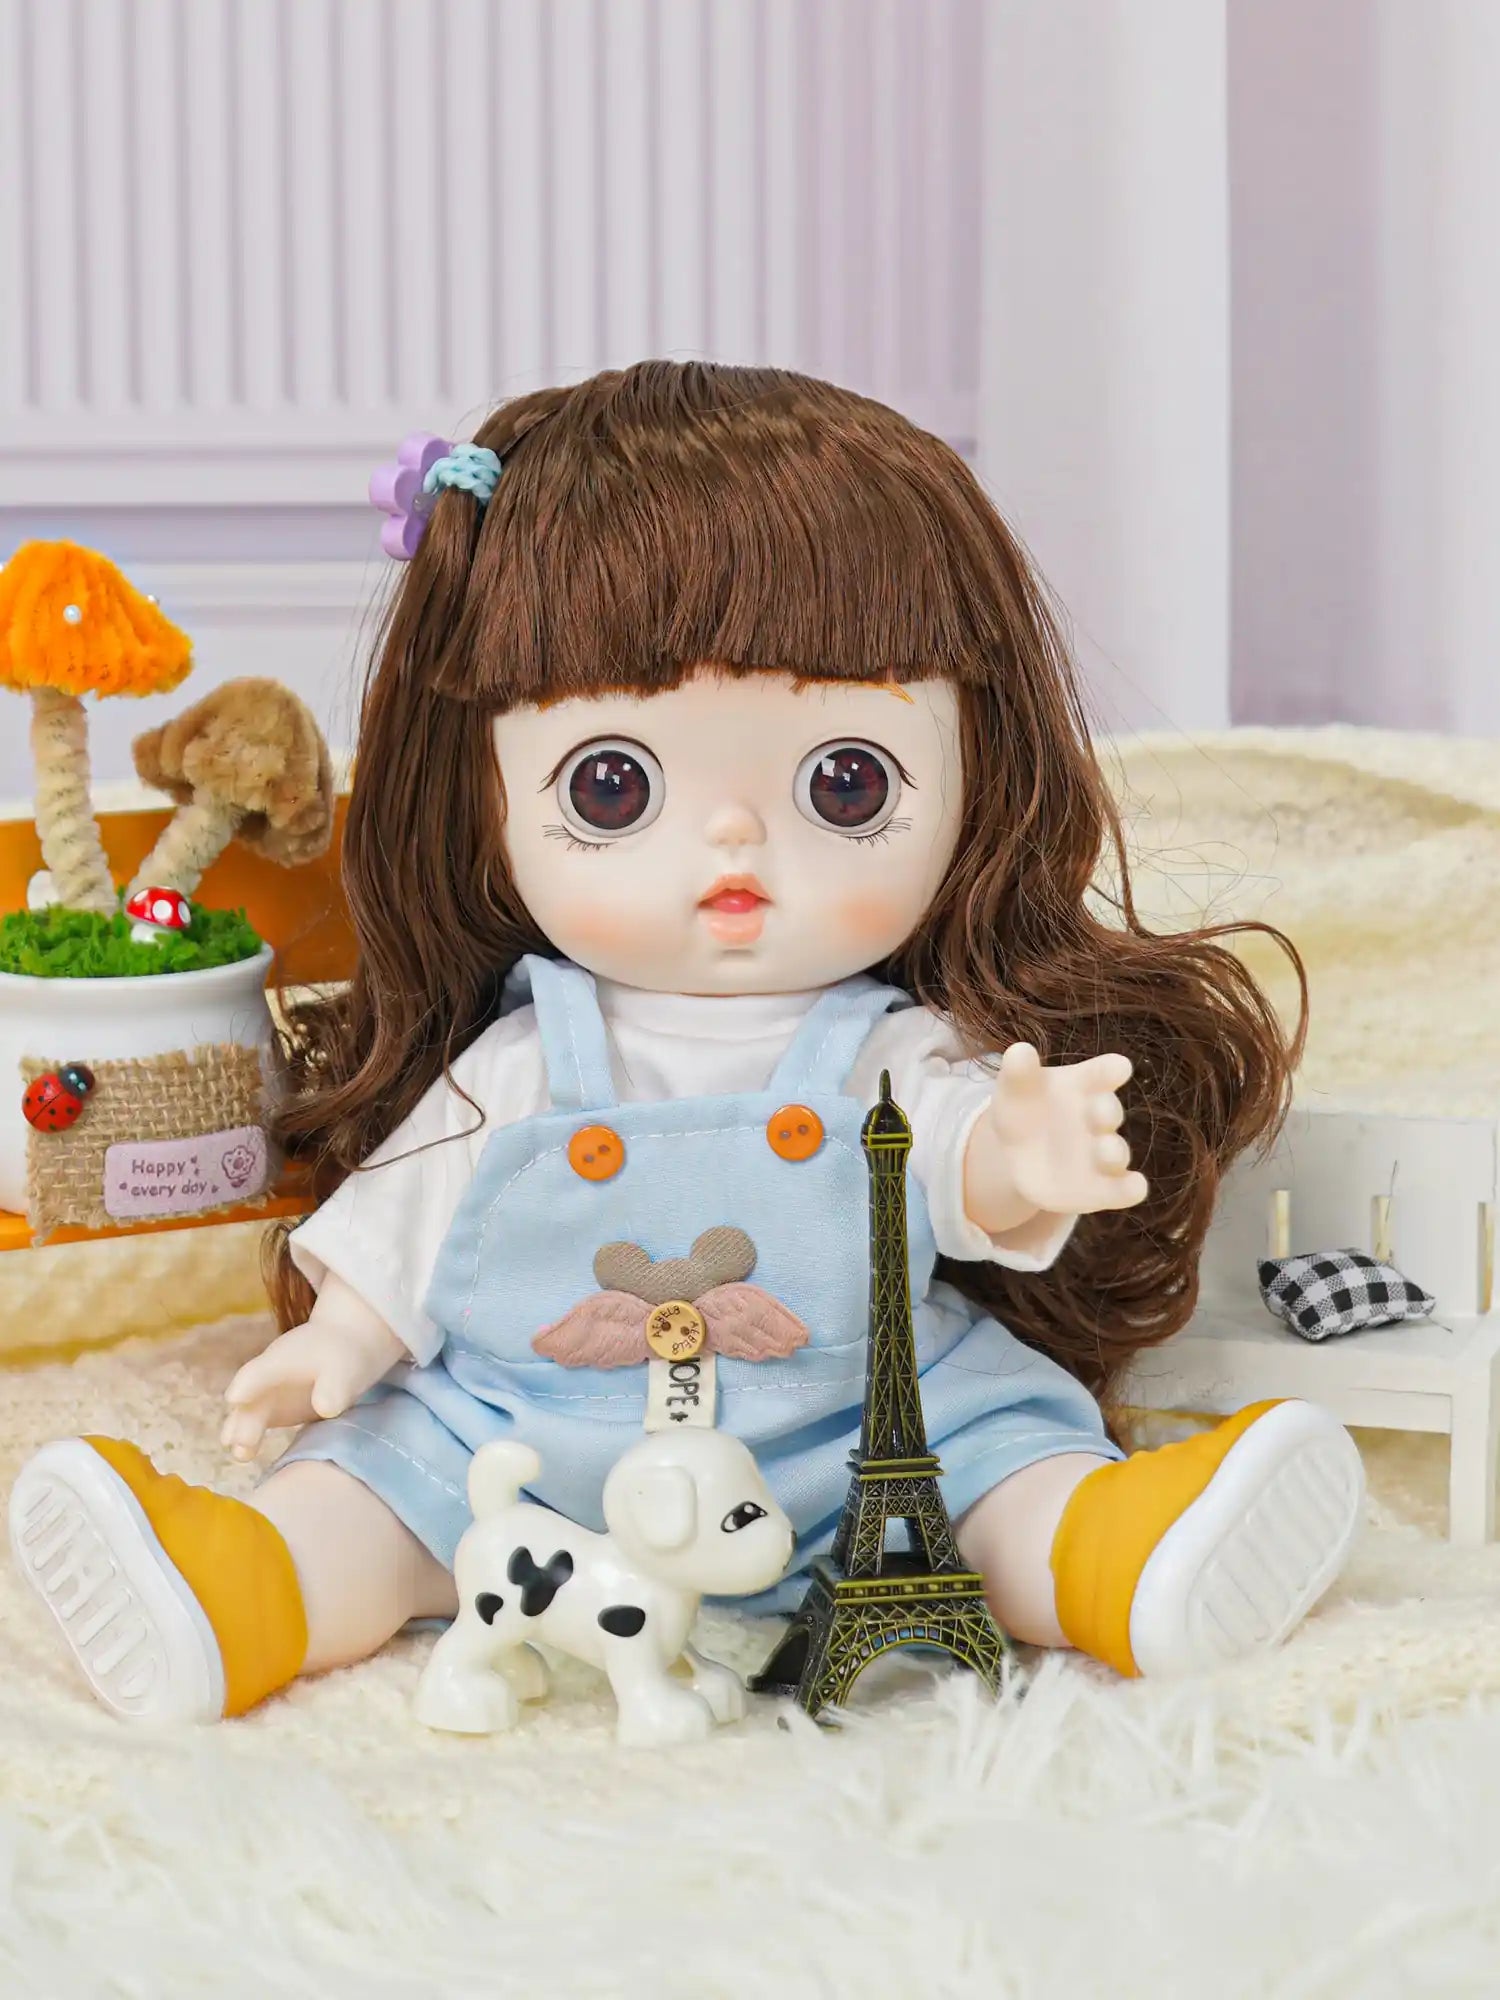 A charming doll in a white blouse and soft blue dungarees decorated with a plush bear, near a model of the Eiffel Tower.